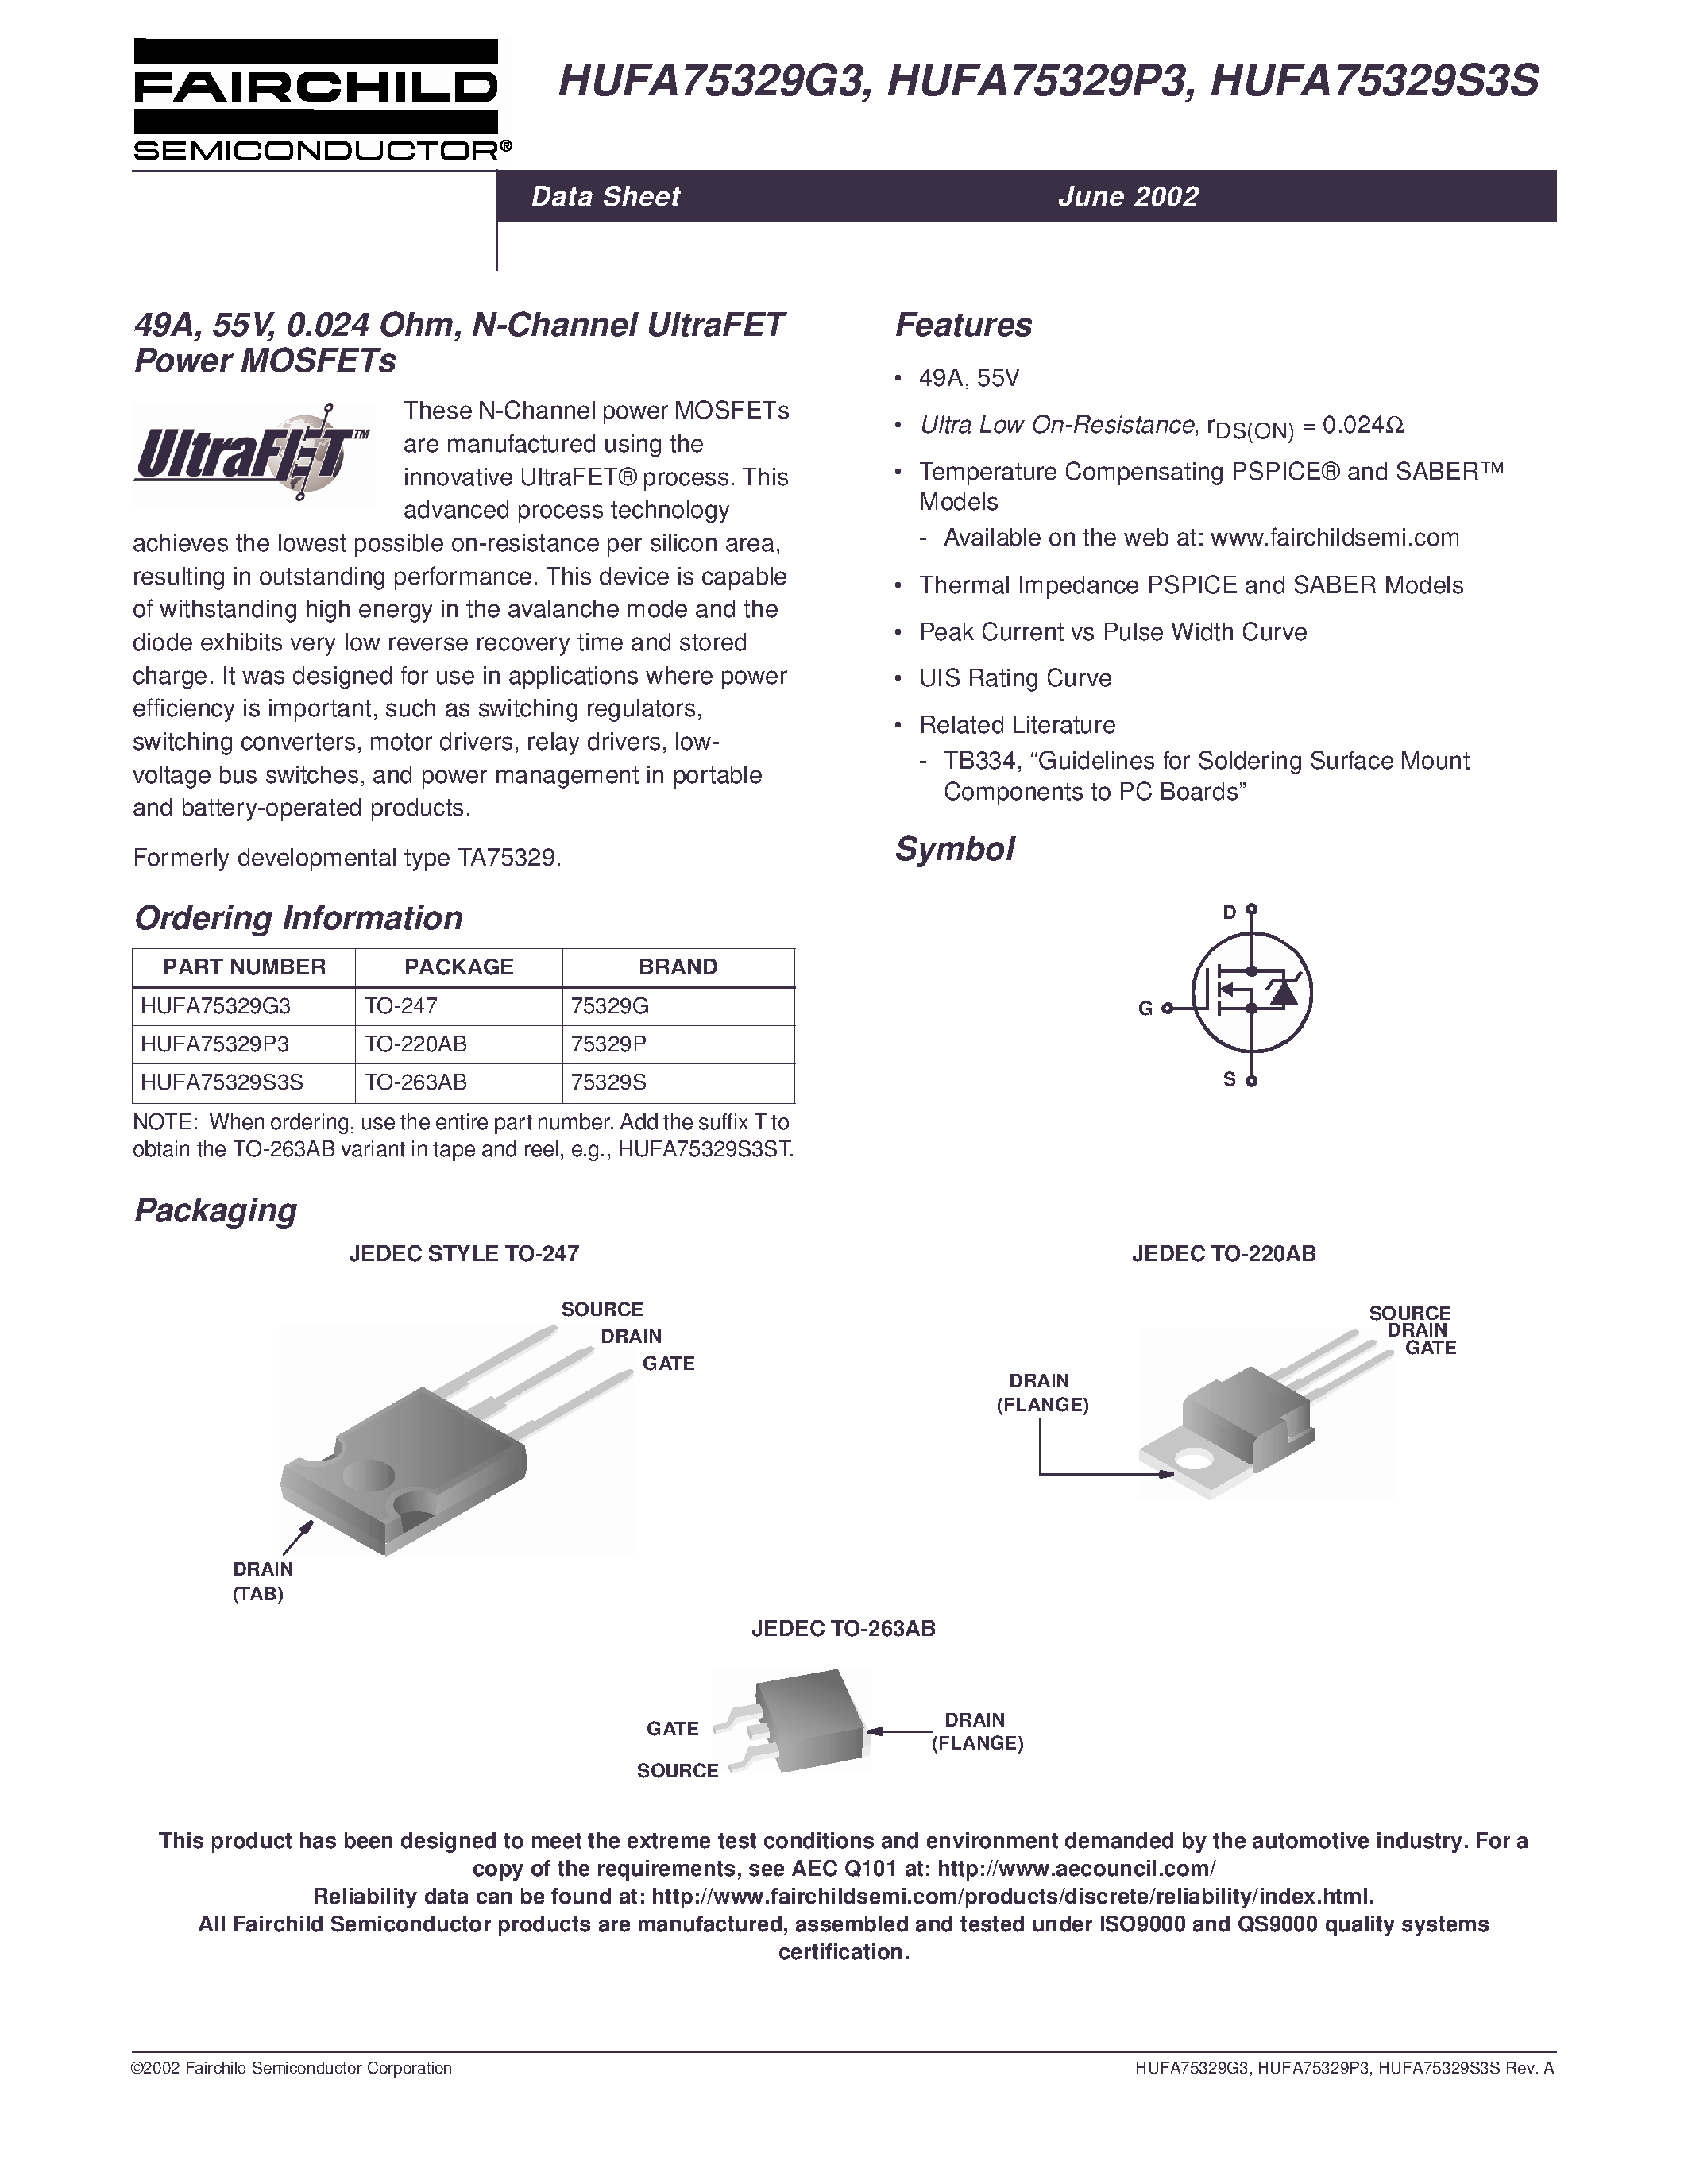 Datasheet HUFA75333P3 - 66A/ 55V/ 0.016 Ohm. N-Channel UltraFET Power MOSFETs page 1